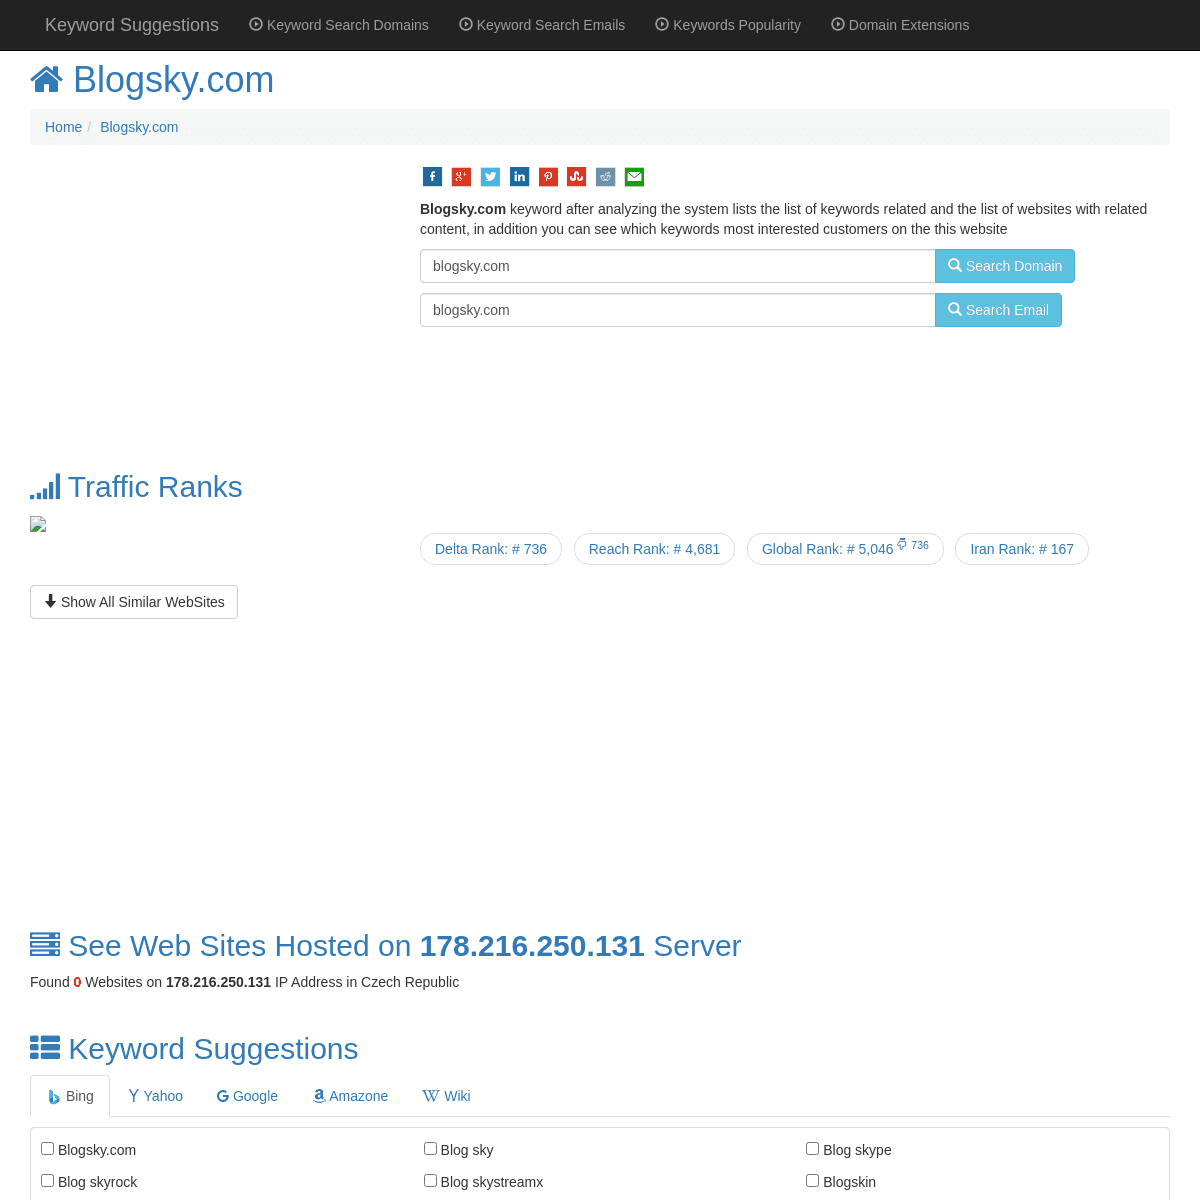 A complete backup of https://www.keyword-suggest-tool.com/search/blogsky.com/